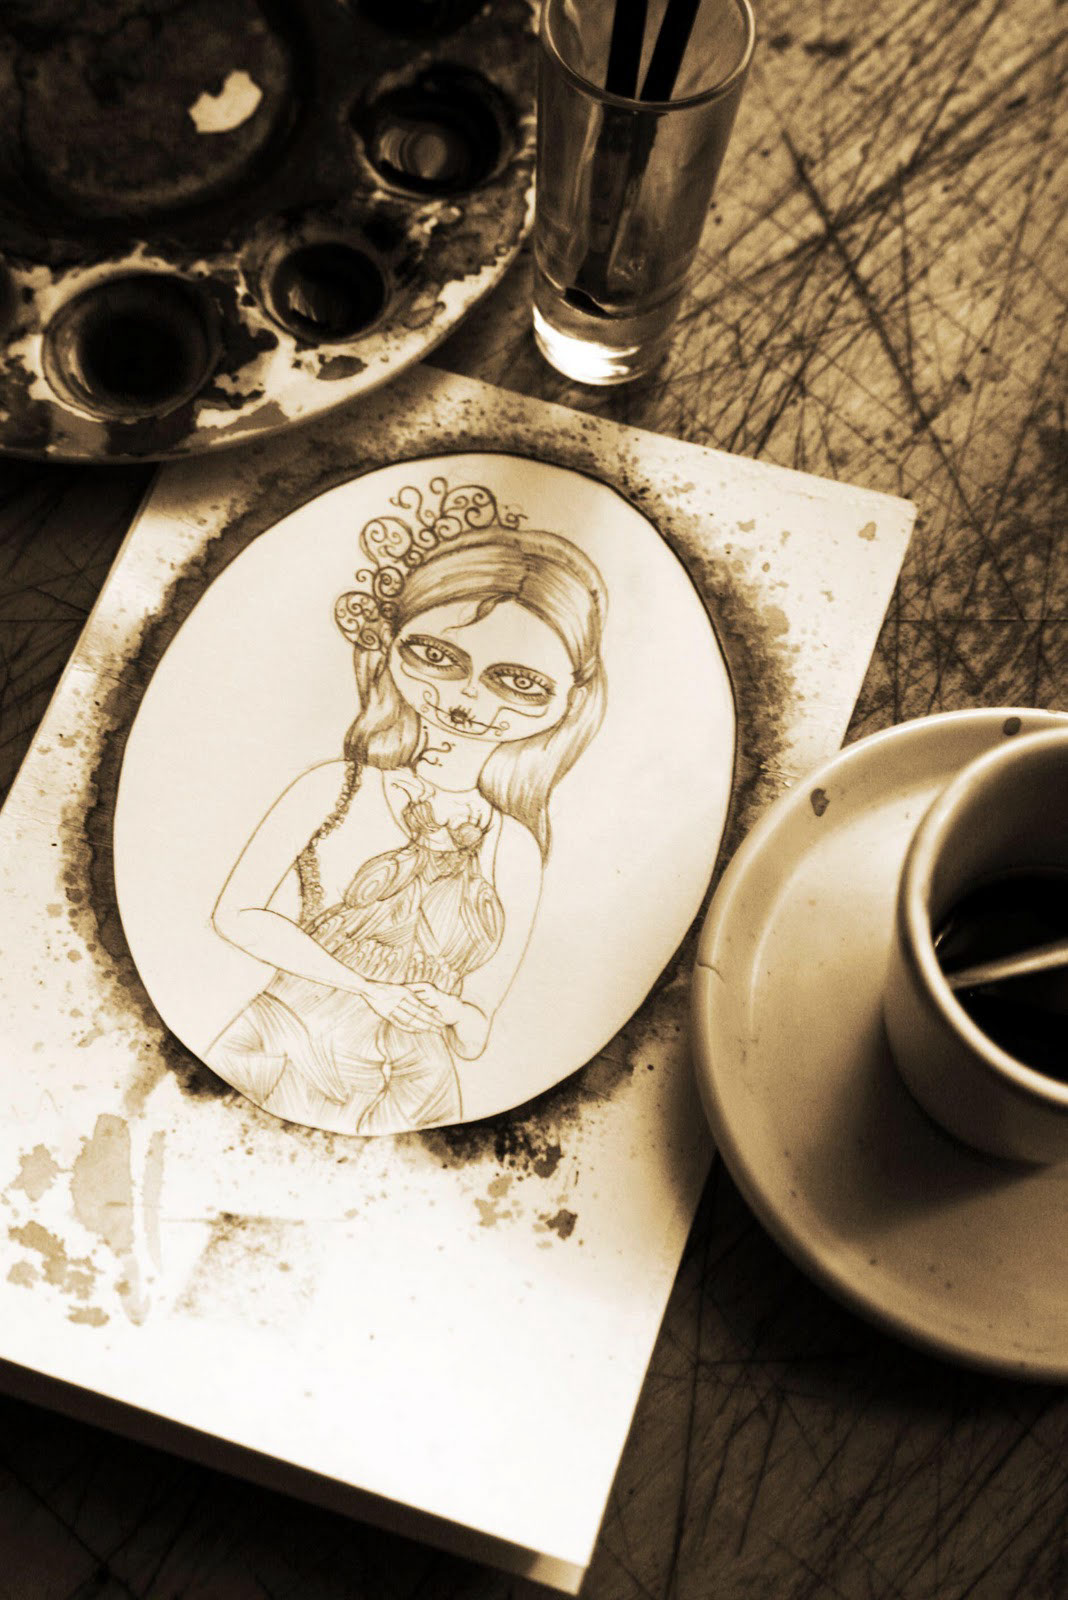 chocolate  coffee  Tequila   dead day of ilustracion  muerte   girls  chicas  wedding  monja  Noon